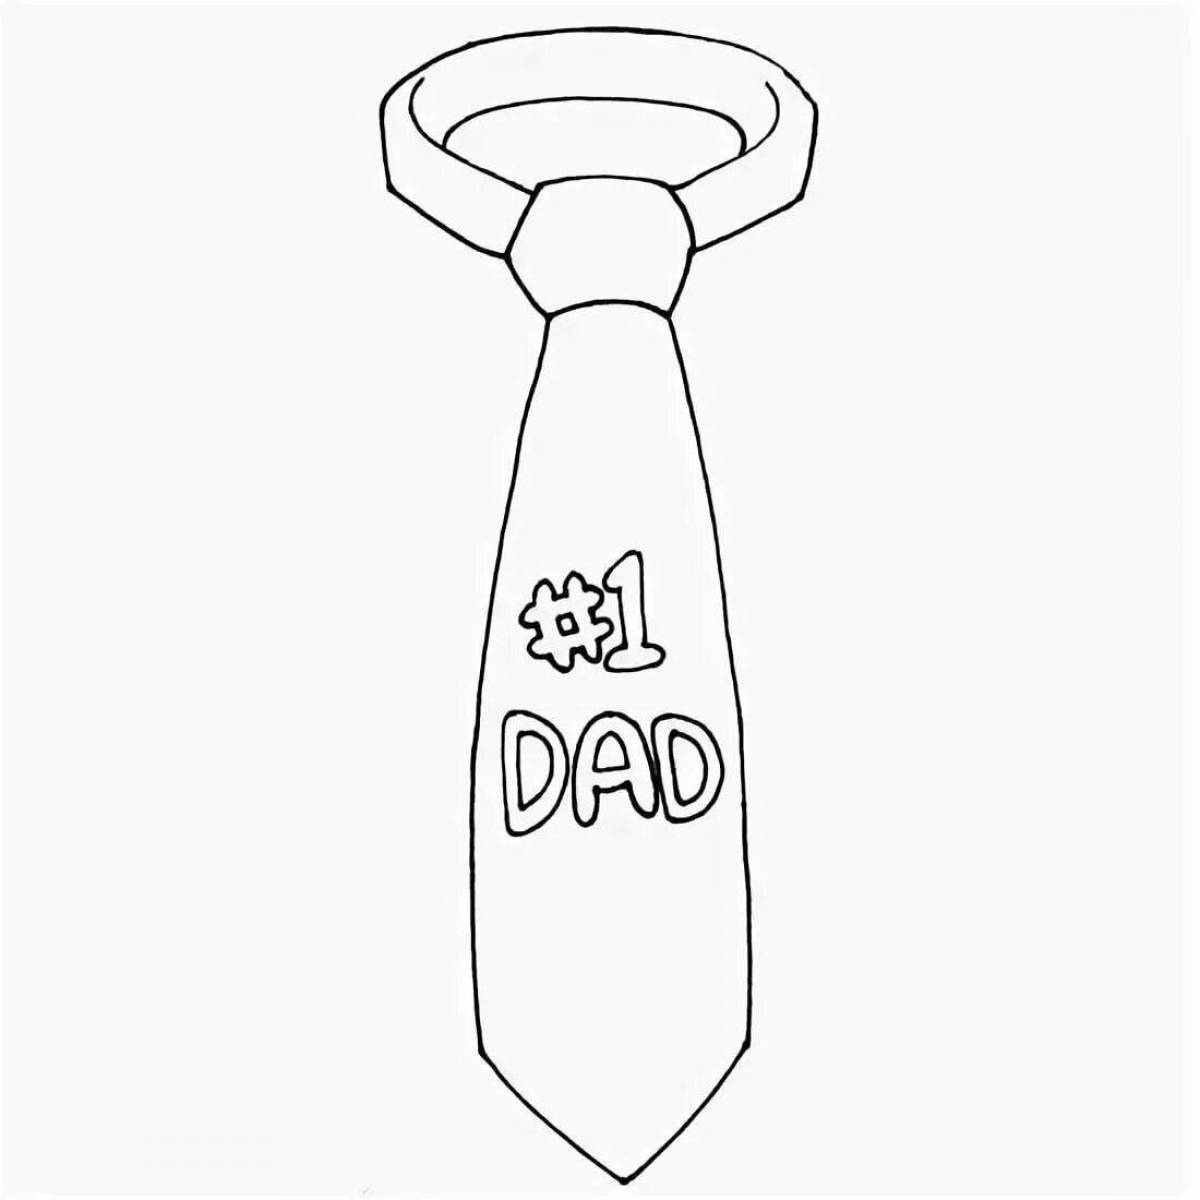 Dad tie for 3 4 year olds #7